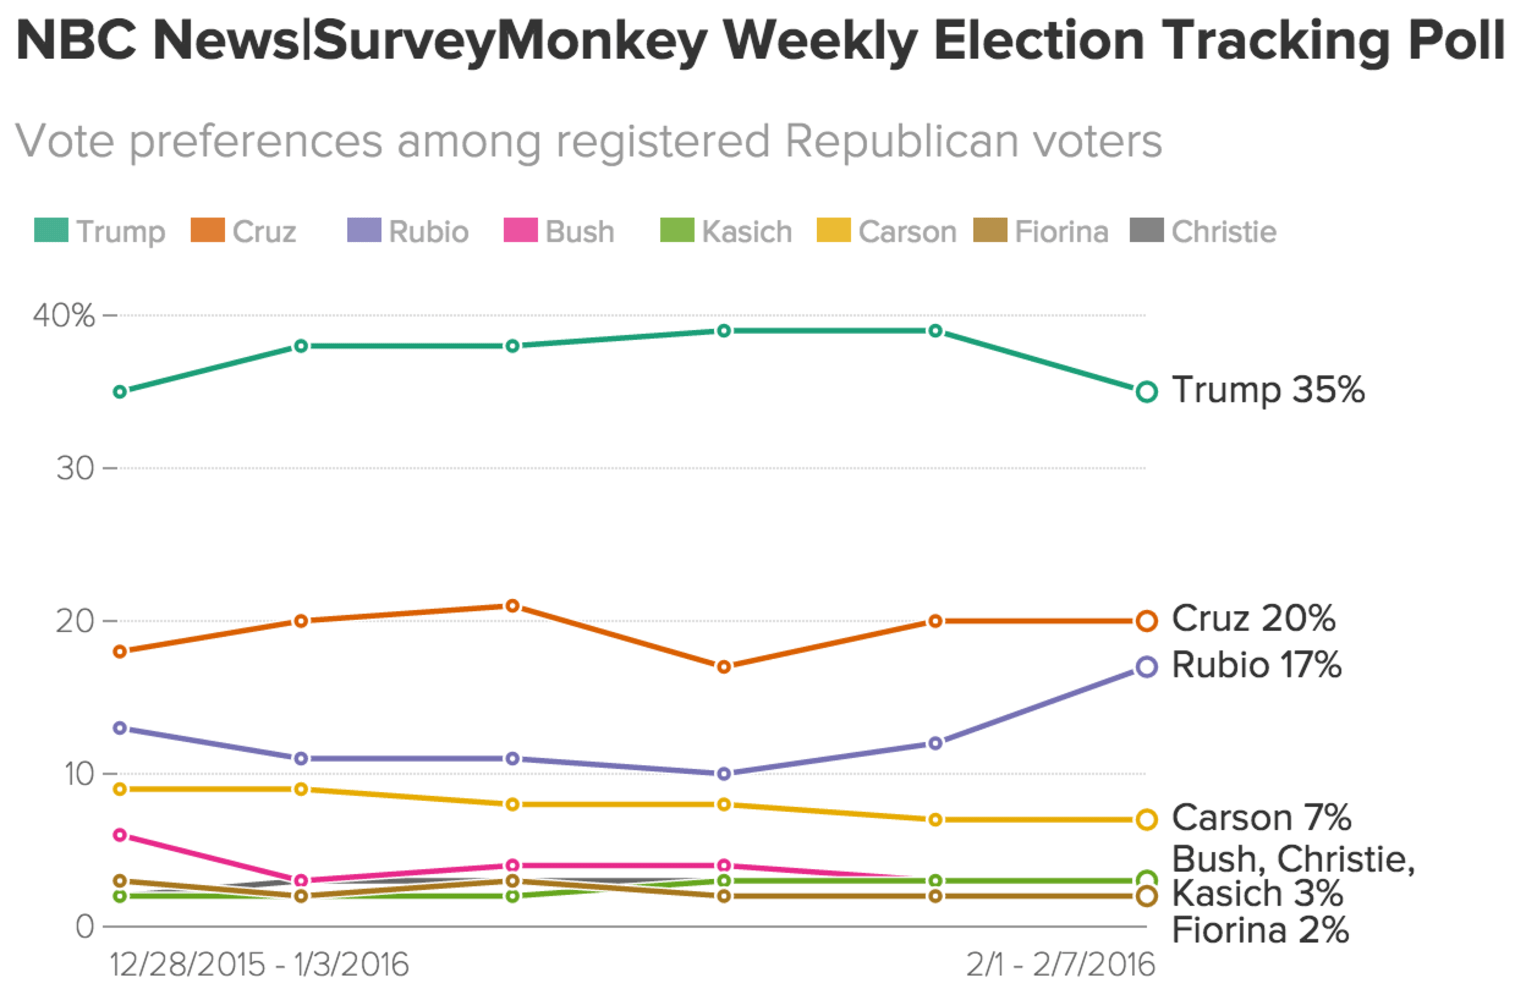 Voters Think Trump Will Win GOP Nomination, But Cruz & Rubio on the Rise: Poll - NBC News1248 x 818